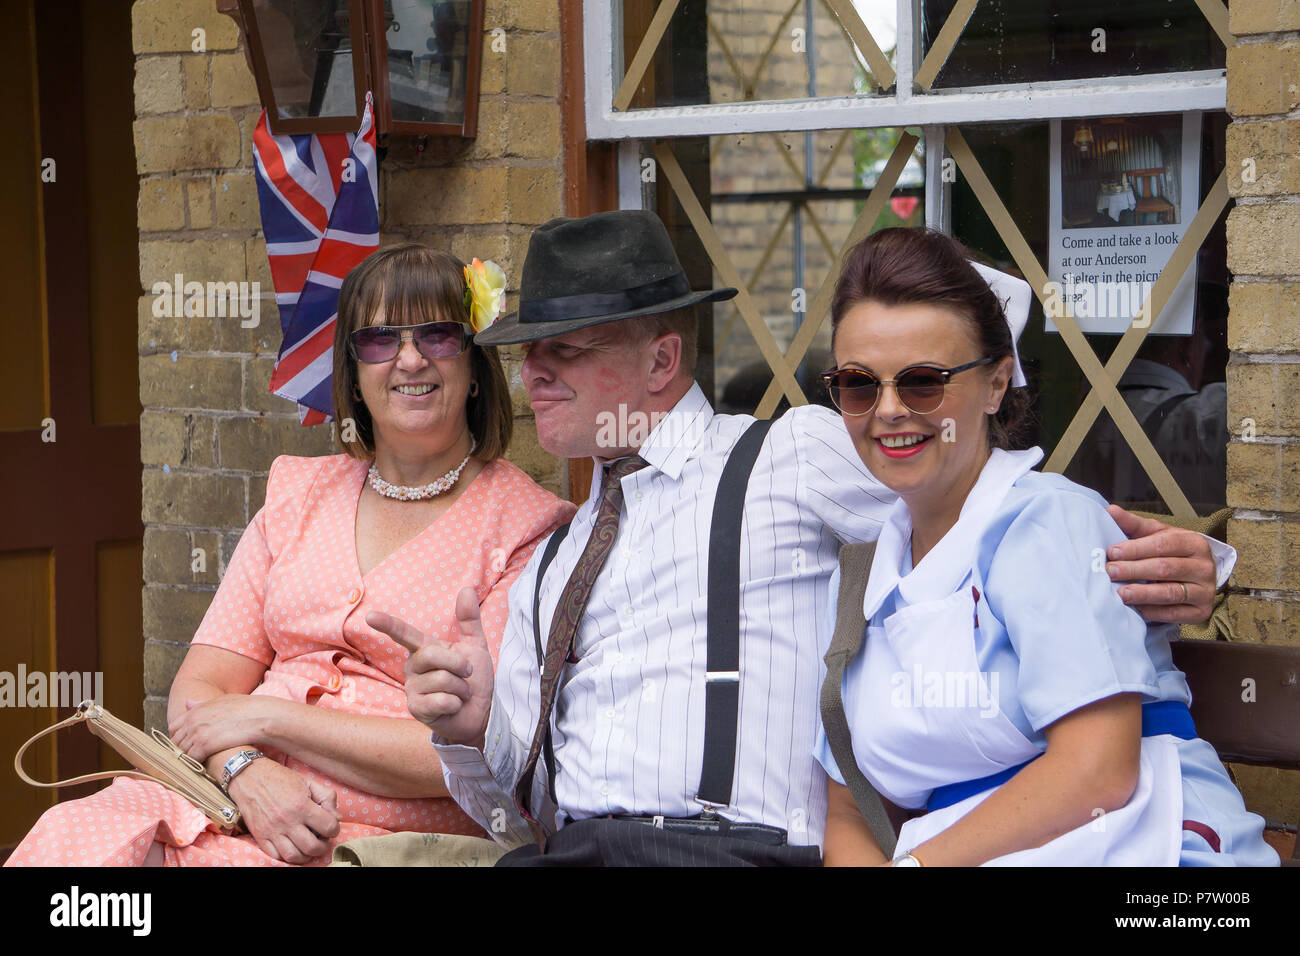 Kidderminster, UK. 7th July, 2018. A journey back in time continues at the Severn Valley Railway as we turn the clock back to the 1940s. Visitors and staff pull out all the stops to ensure a realistic WW2 wartime Britain is experienced by all on this heritage railway line. Civilians and medical staff enjoy the community spirit as folk remember all those that played their part during the 1940s crisis. Credit: Lee Hudson/Alamy Live News Stock Photo